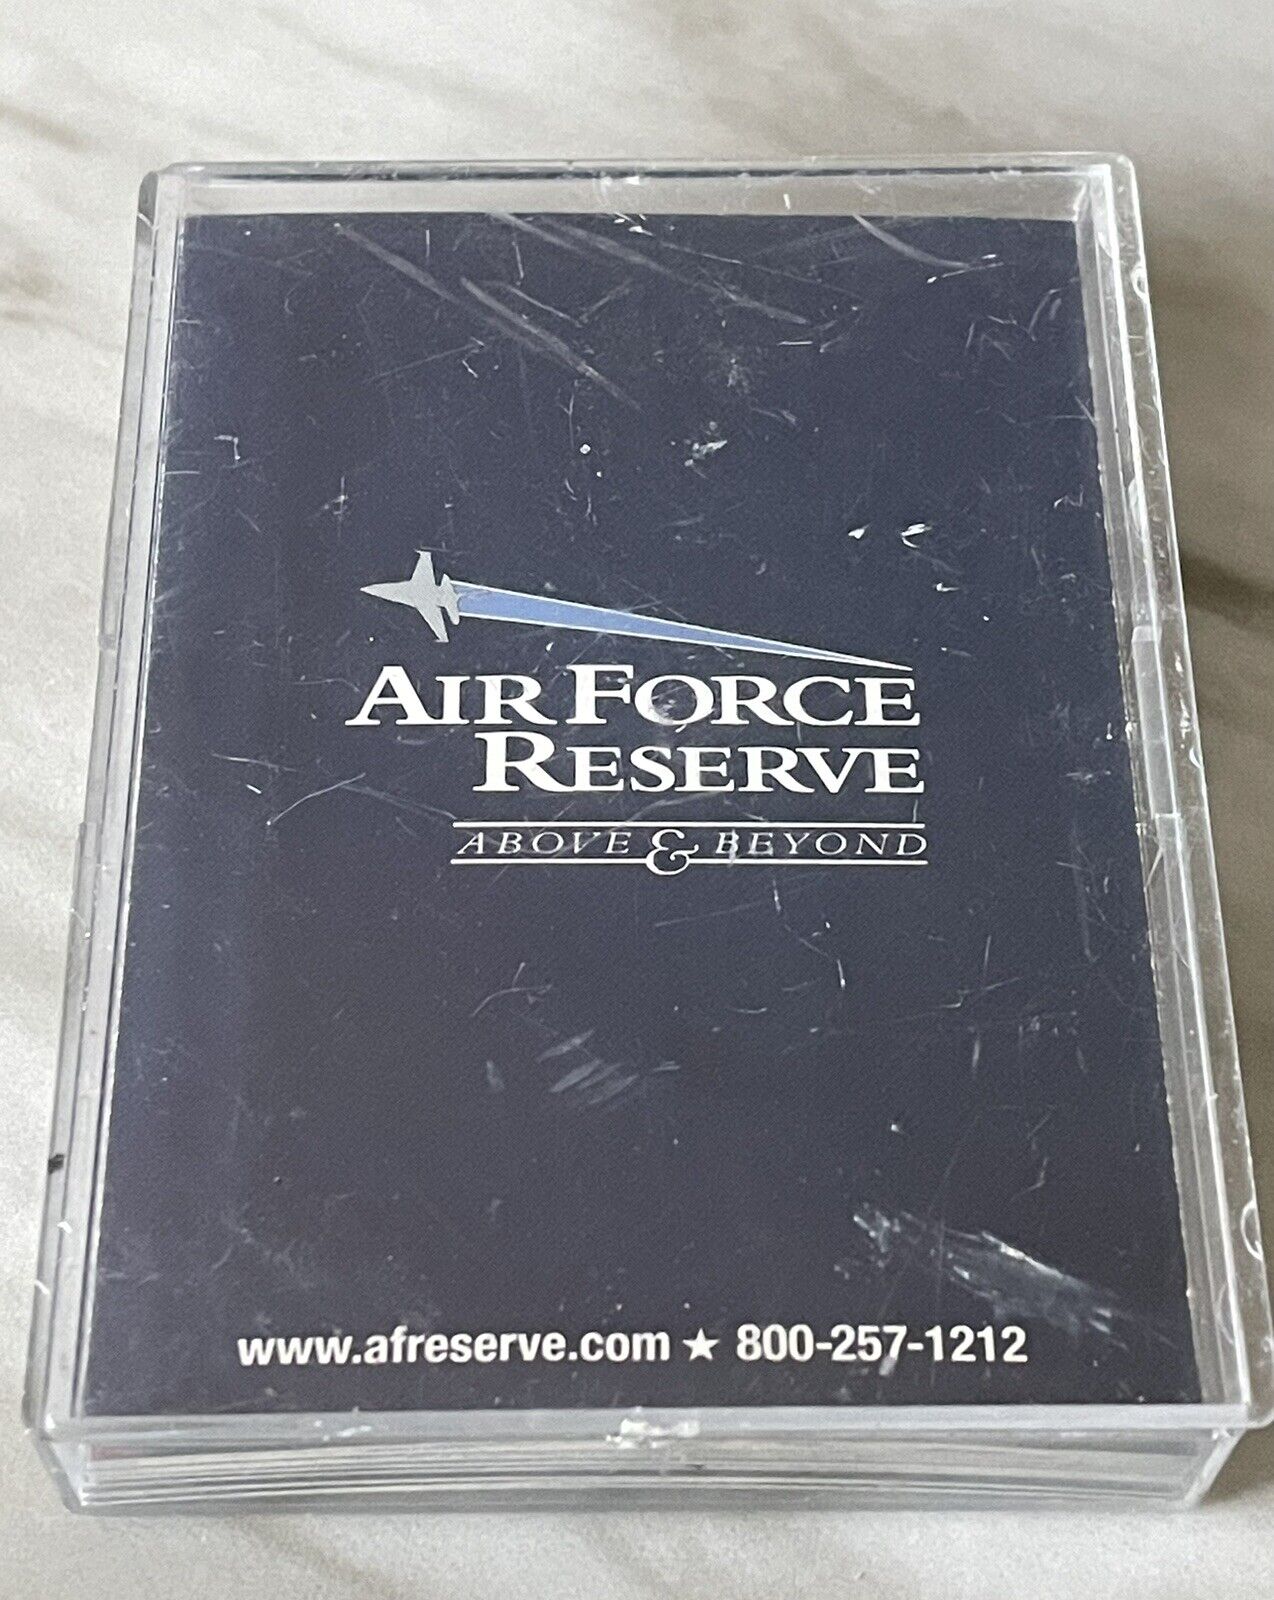 US Air Force reserve military trading card set